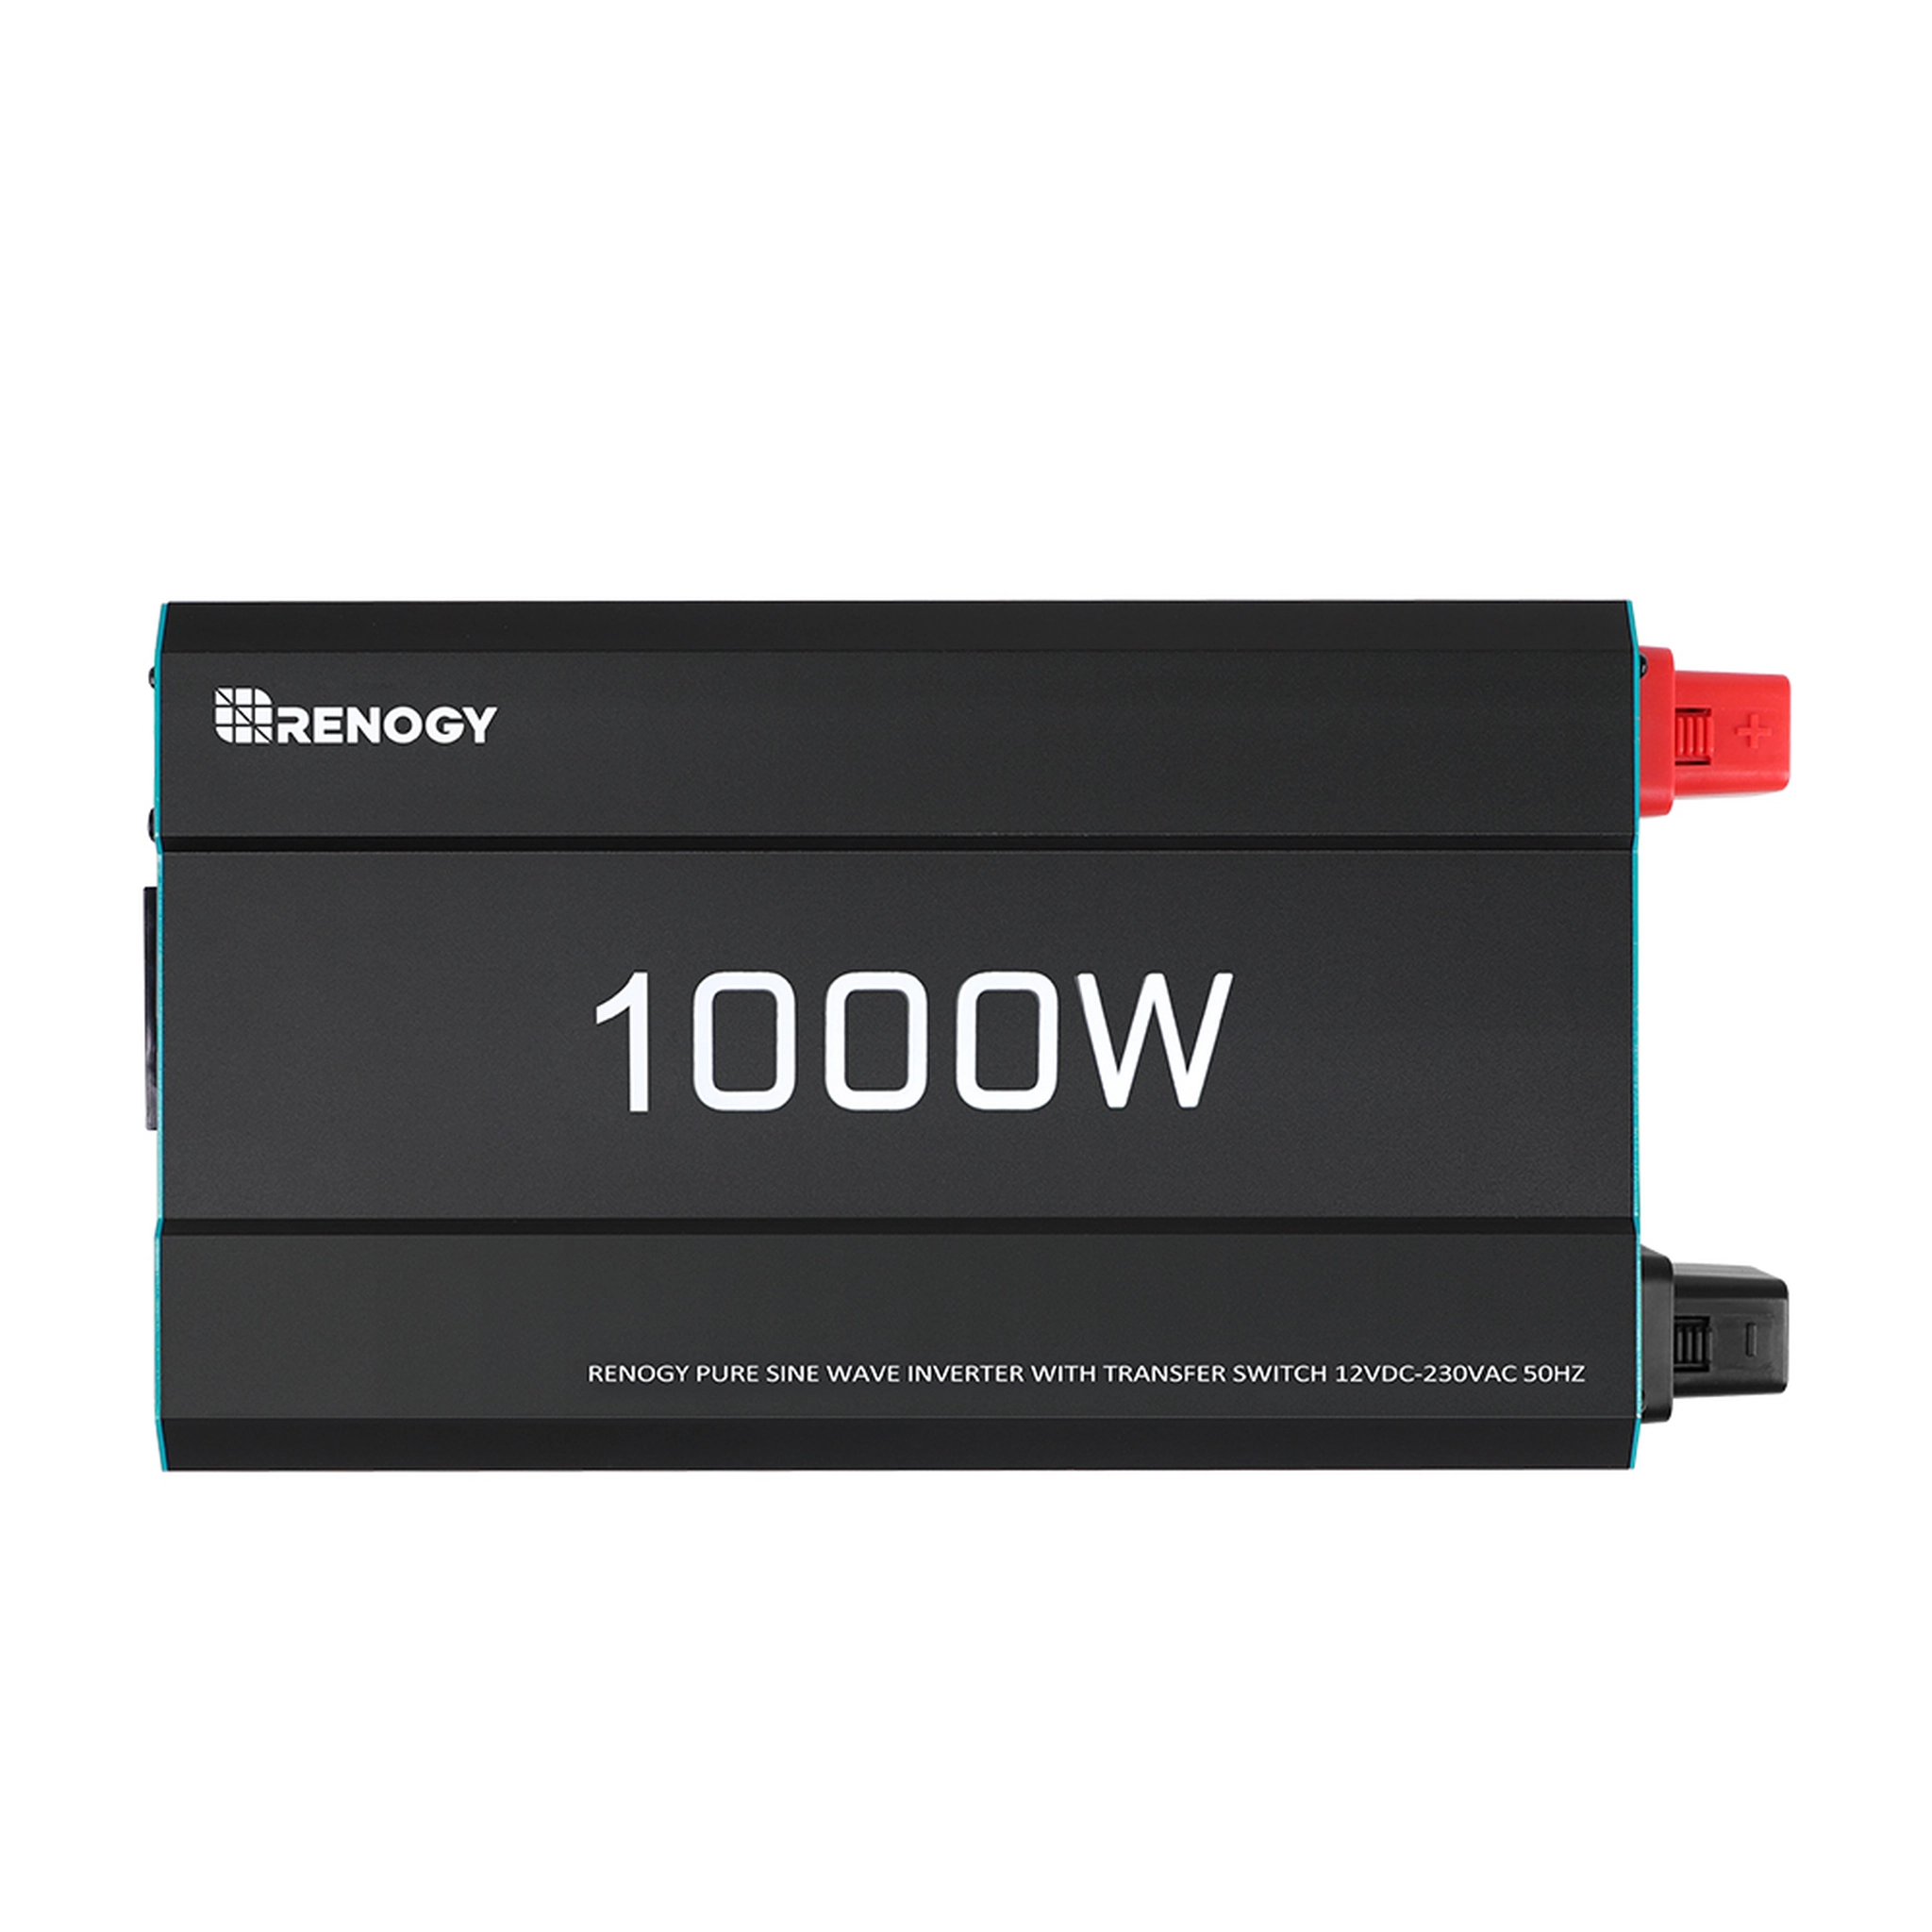 2000W 12V Pure Sine Wave Inverter with Power Saving Mode